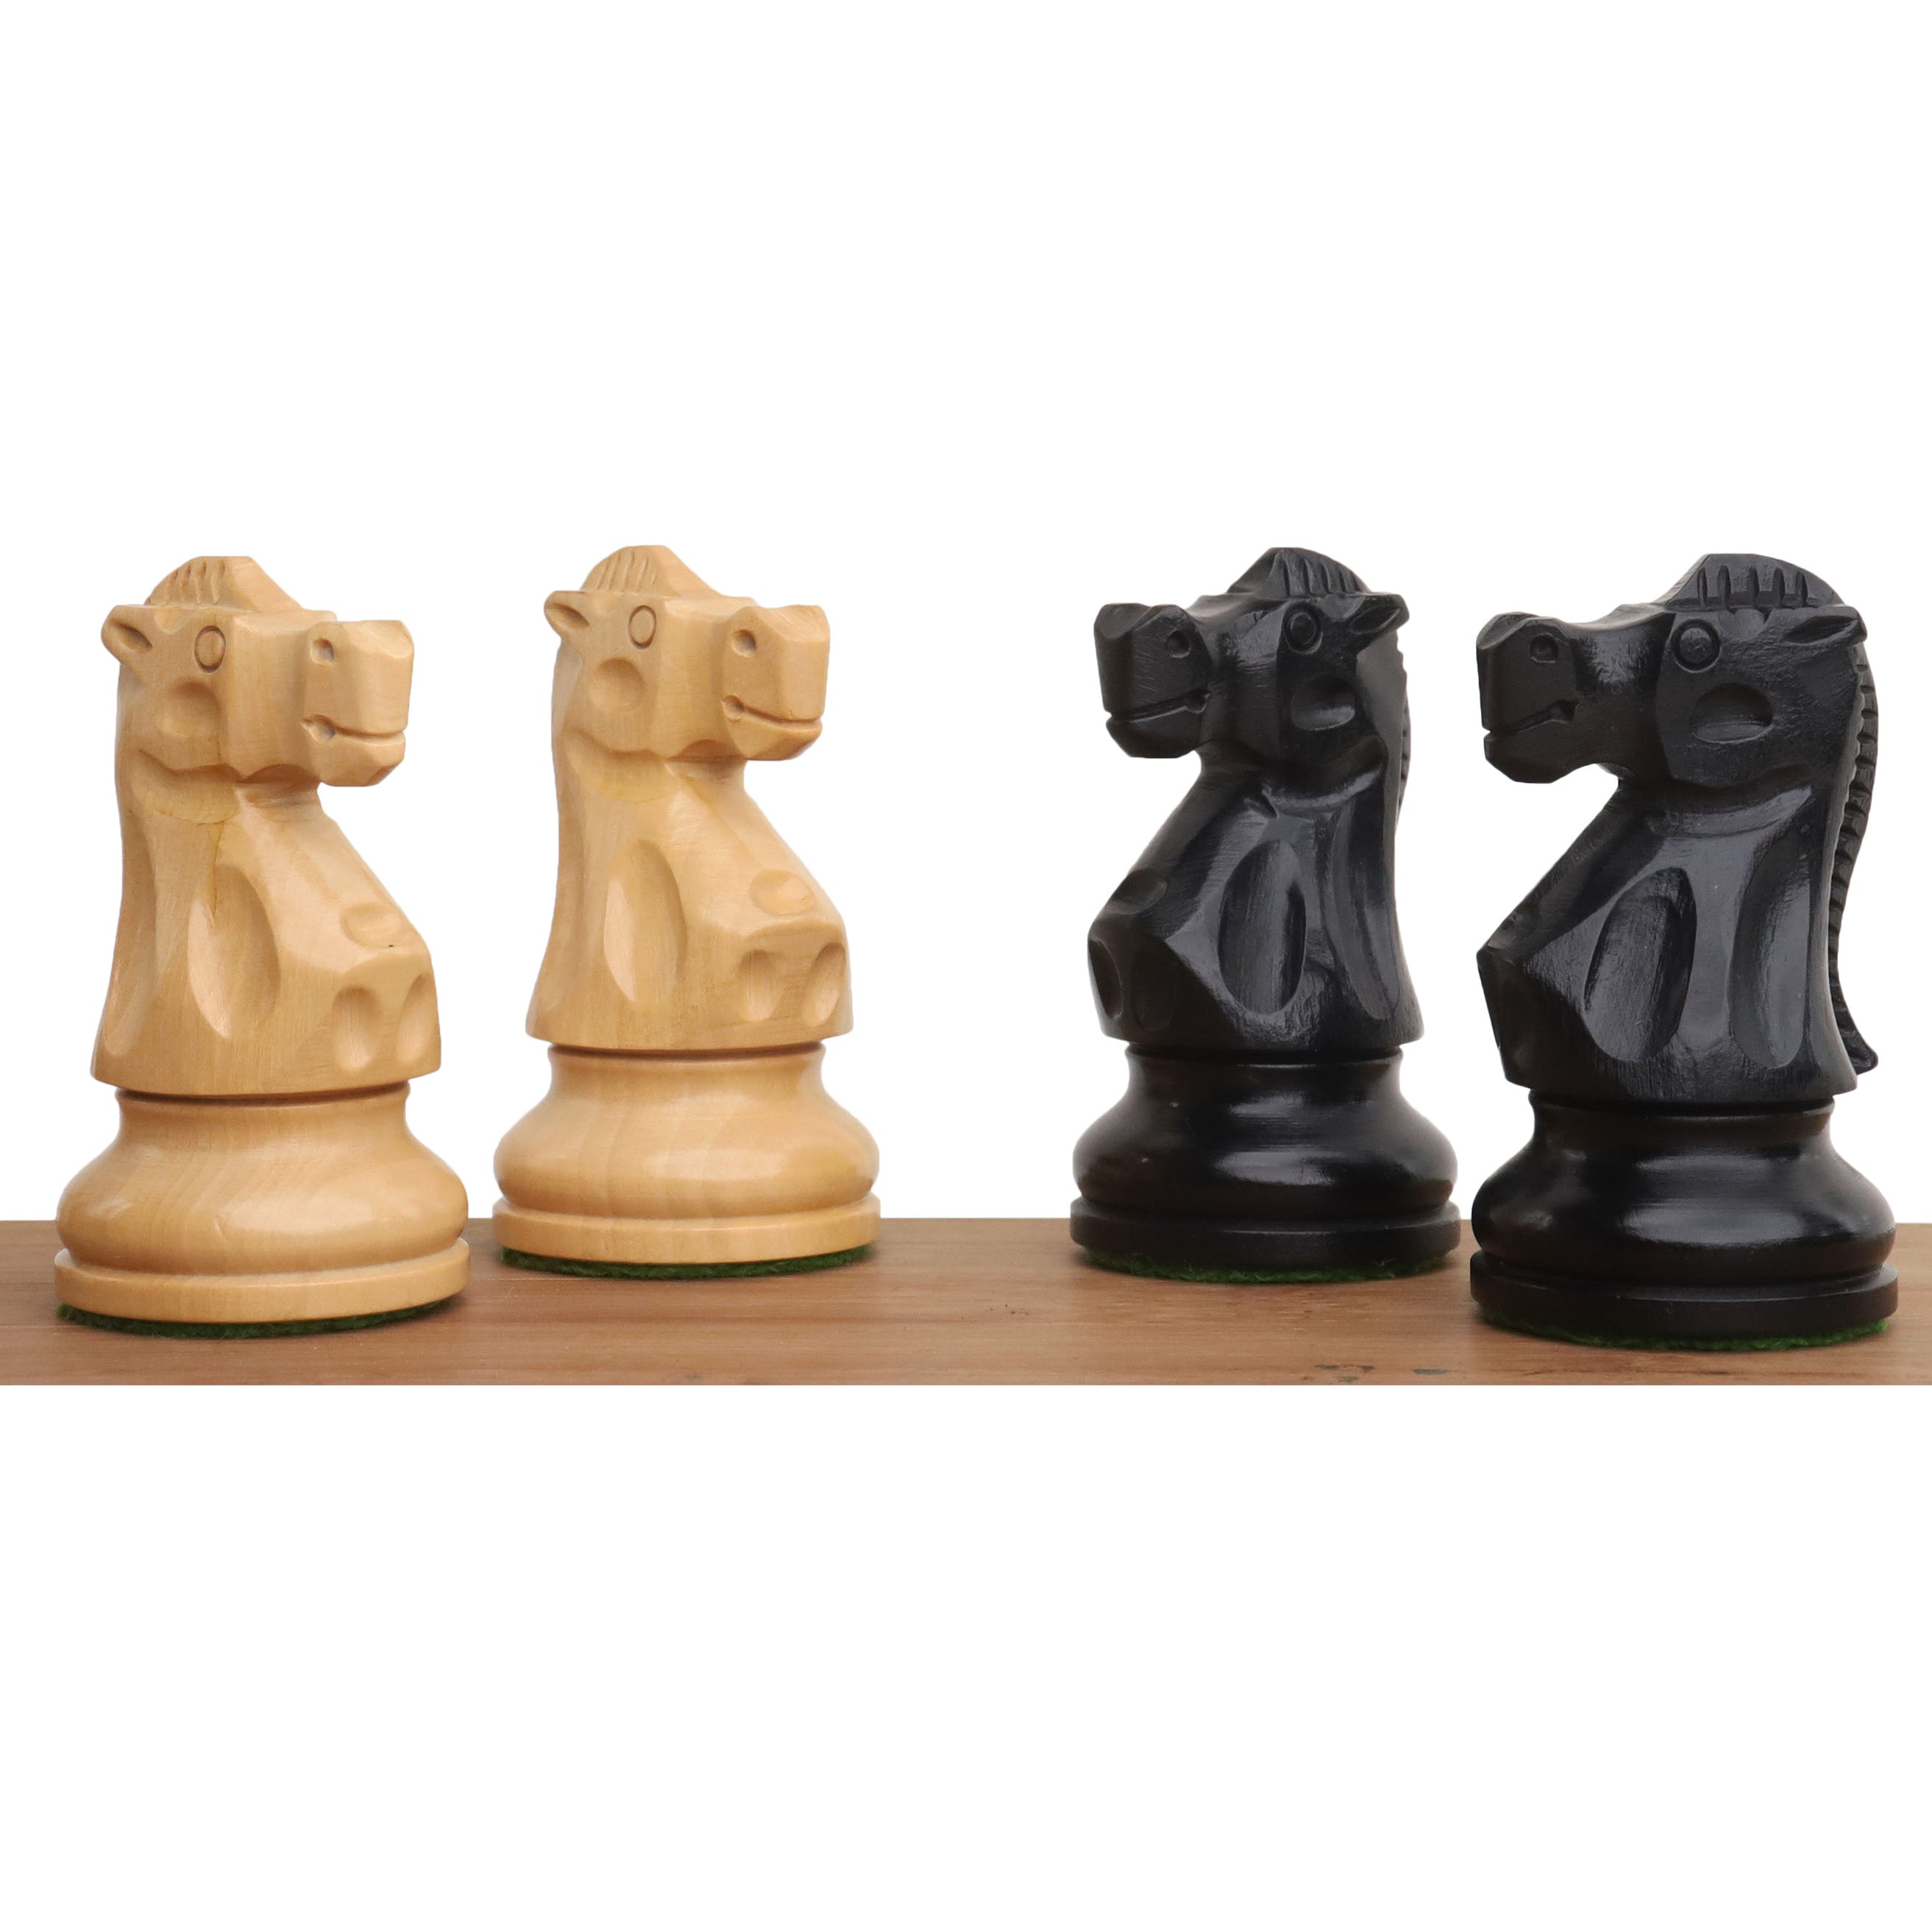 3.8" Reykjavik Series Staunton Chess Set- Chess Pieces Only - Weighted Boxwood